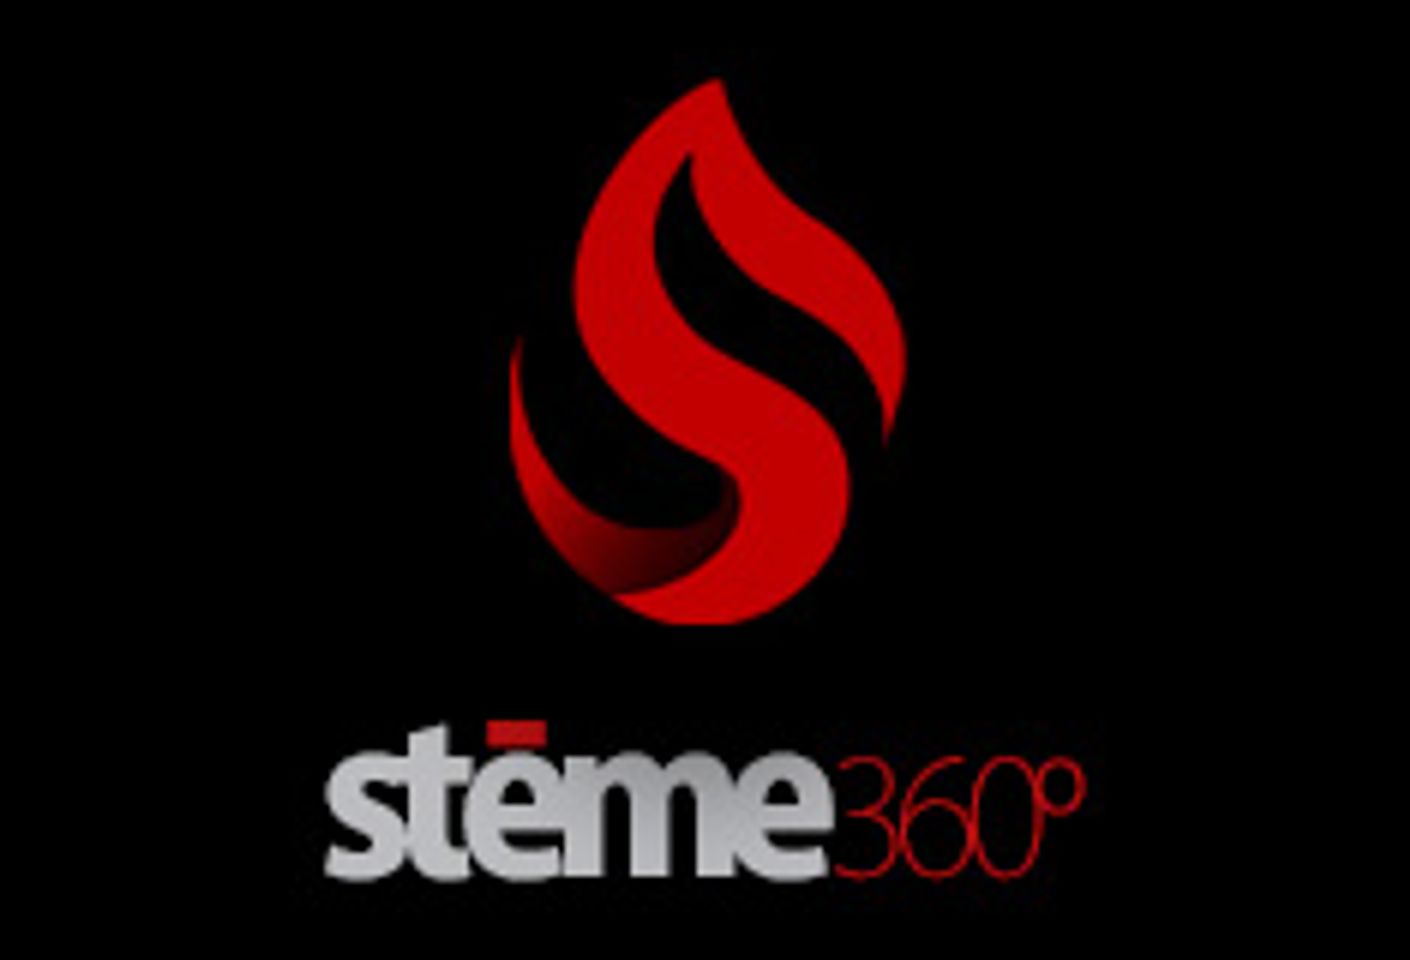 STEME360 Announces Refreshed Website, New Offerings to Novelty Manufacturers